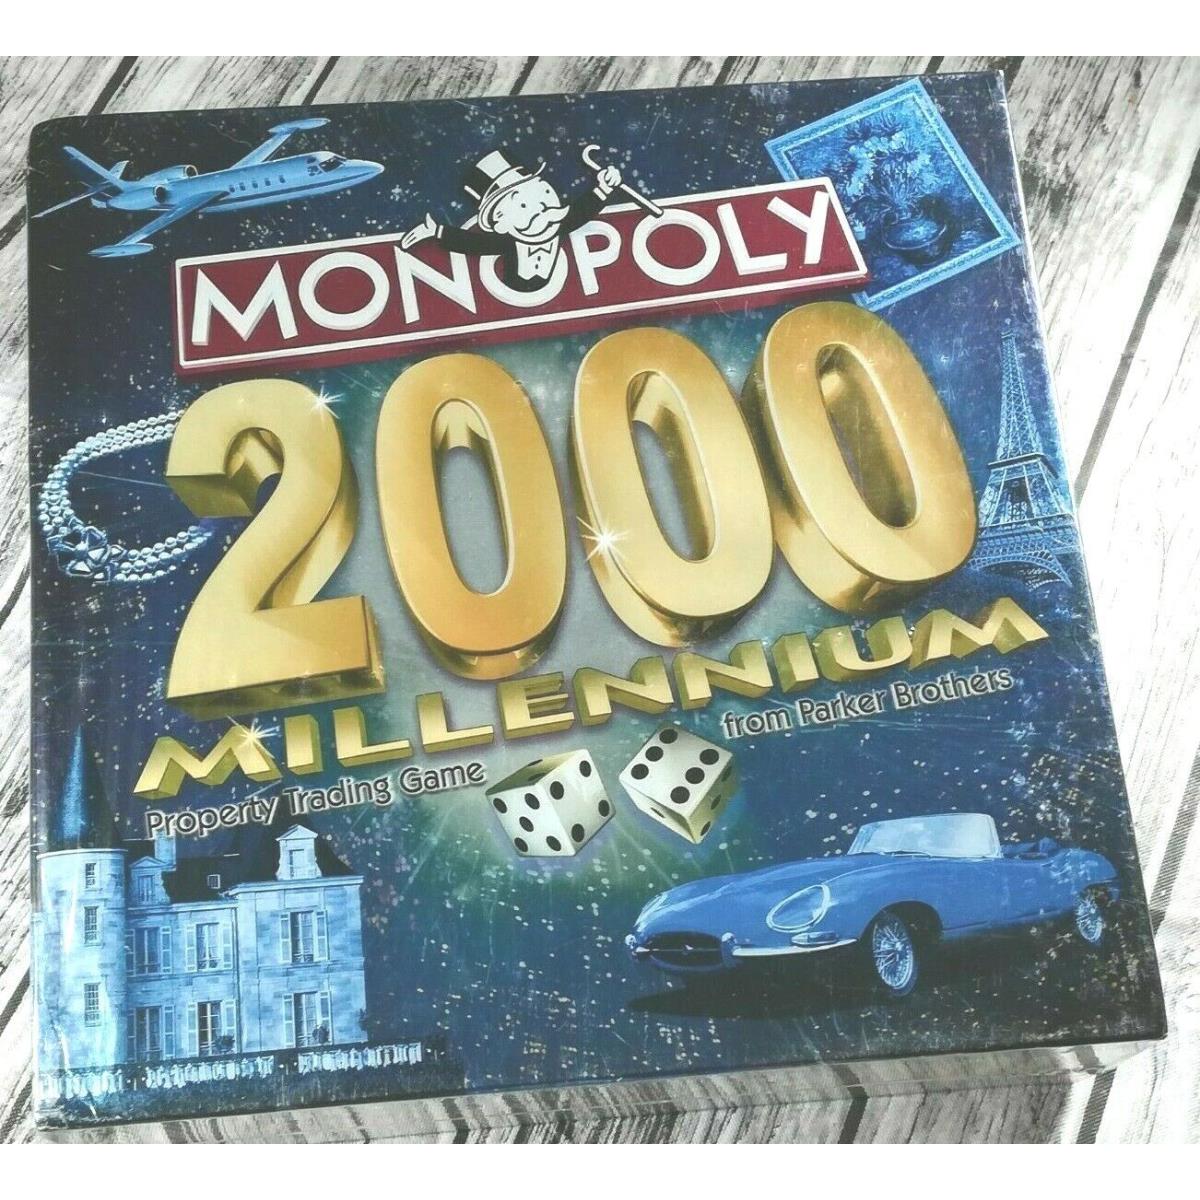 Monopoly 2000 Millenium Property Trading Game From Parker Brothers Hasbro 41295